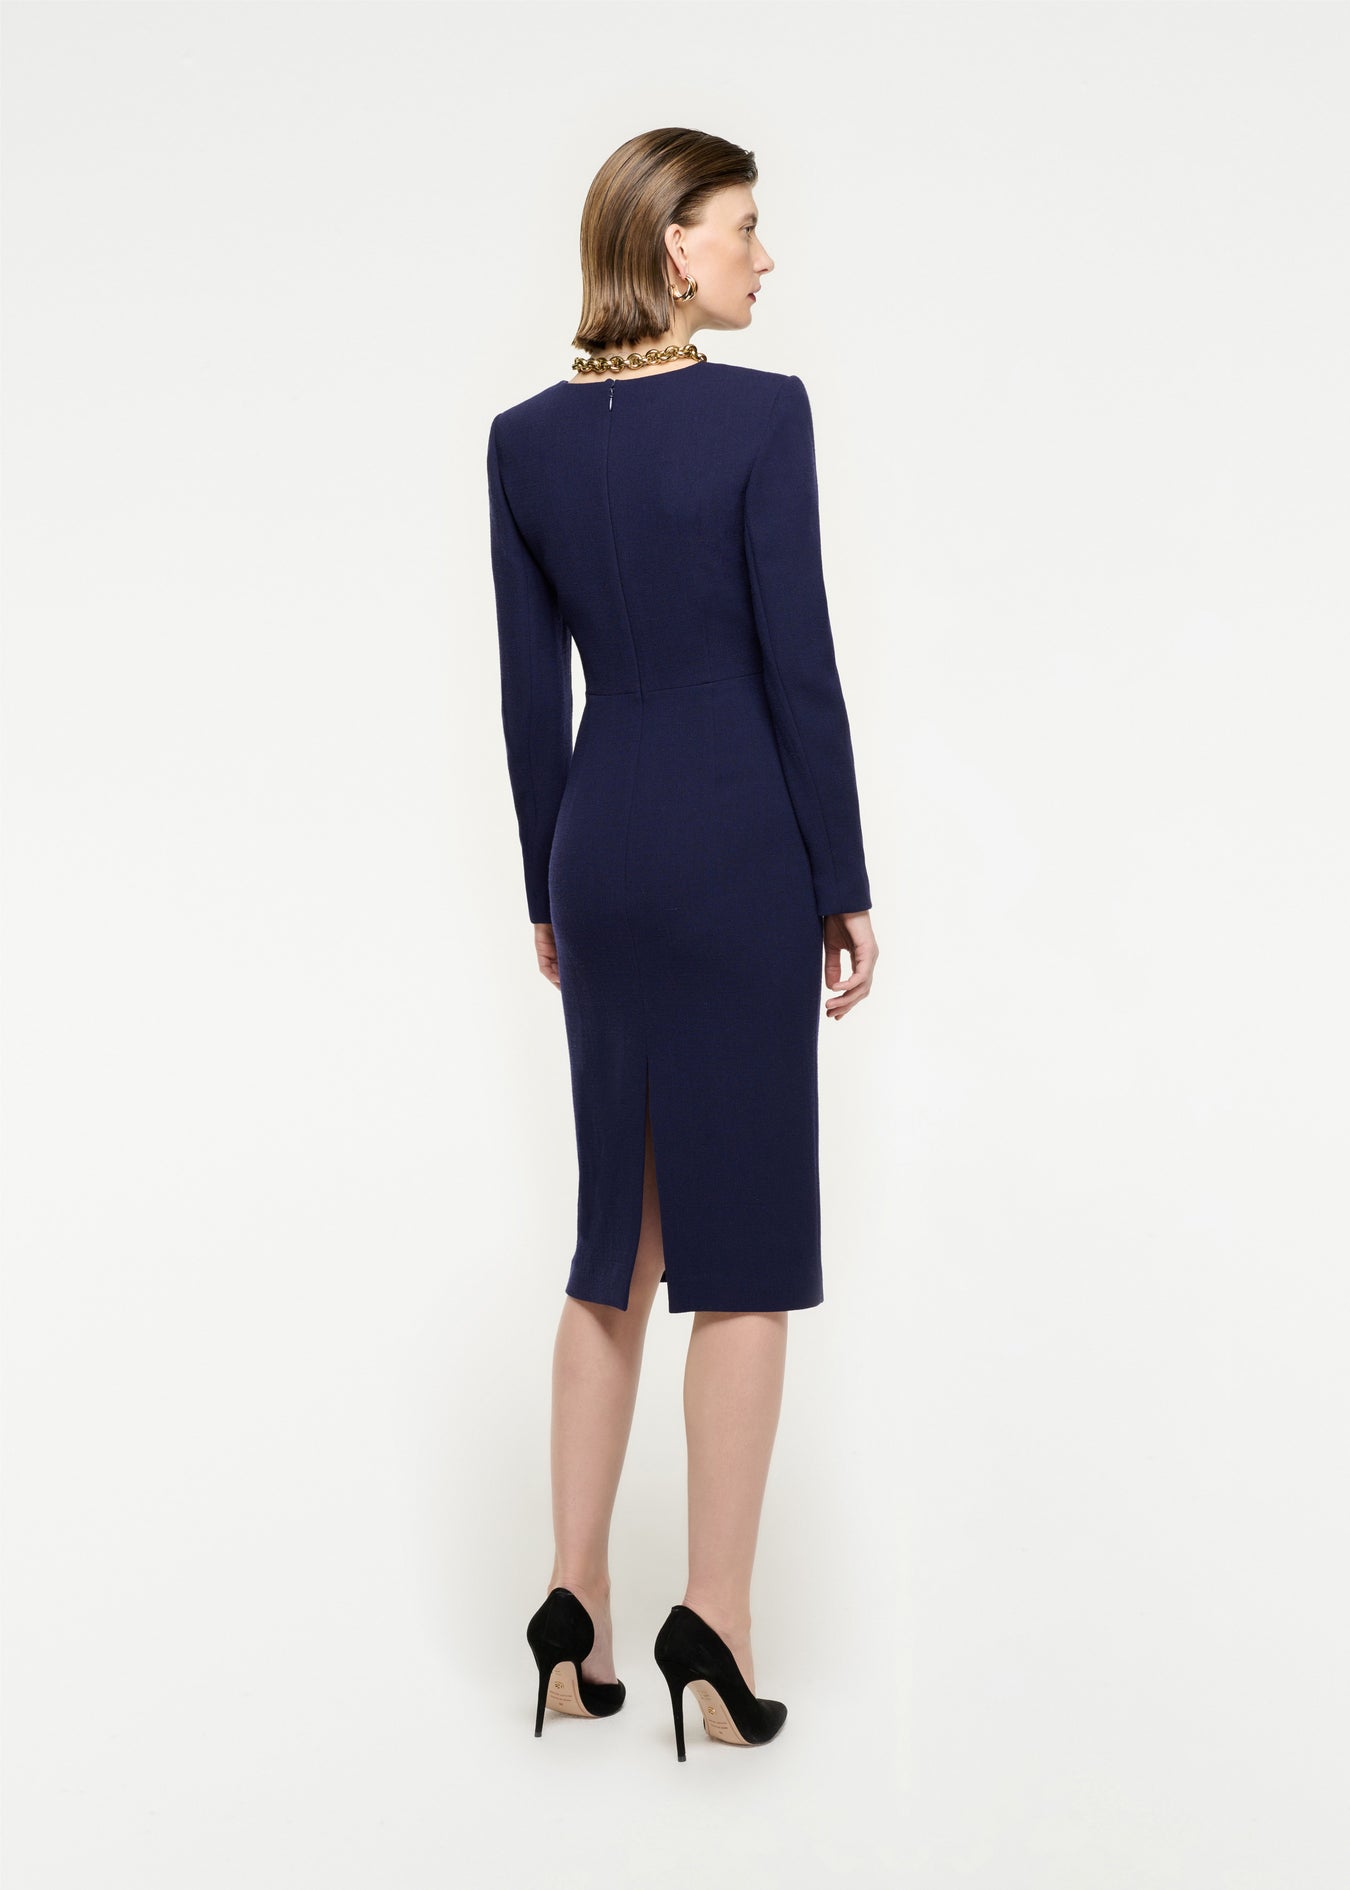 The back of a woman wearing the Long Sleeve Wool Crepe Midi Dress in Navy